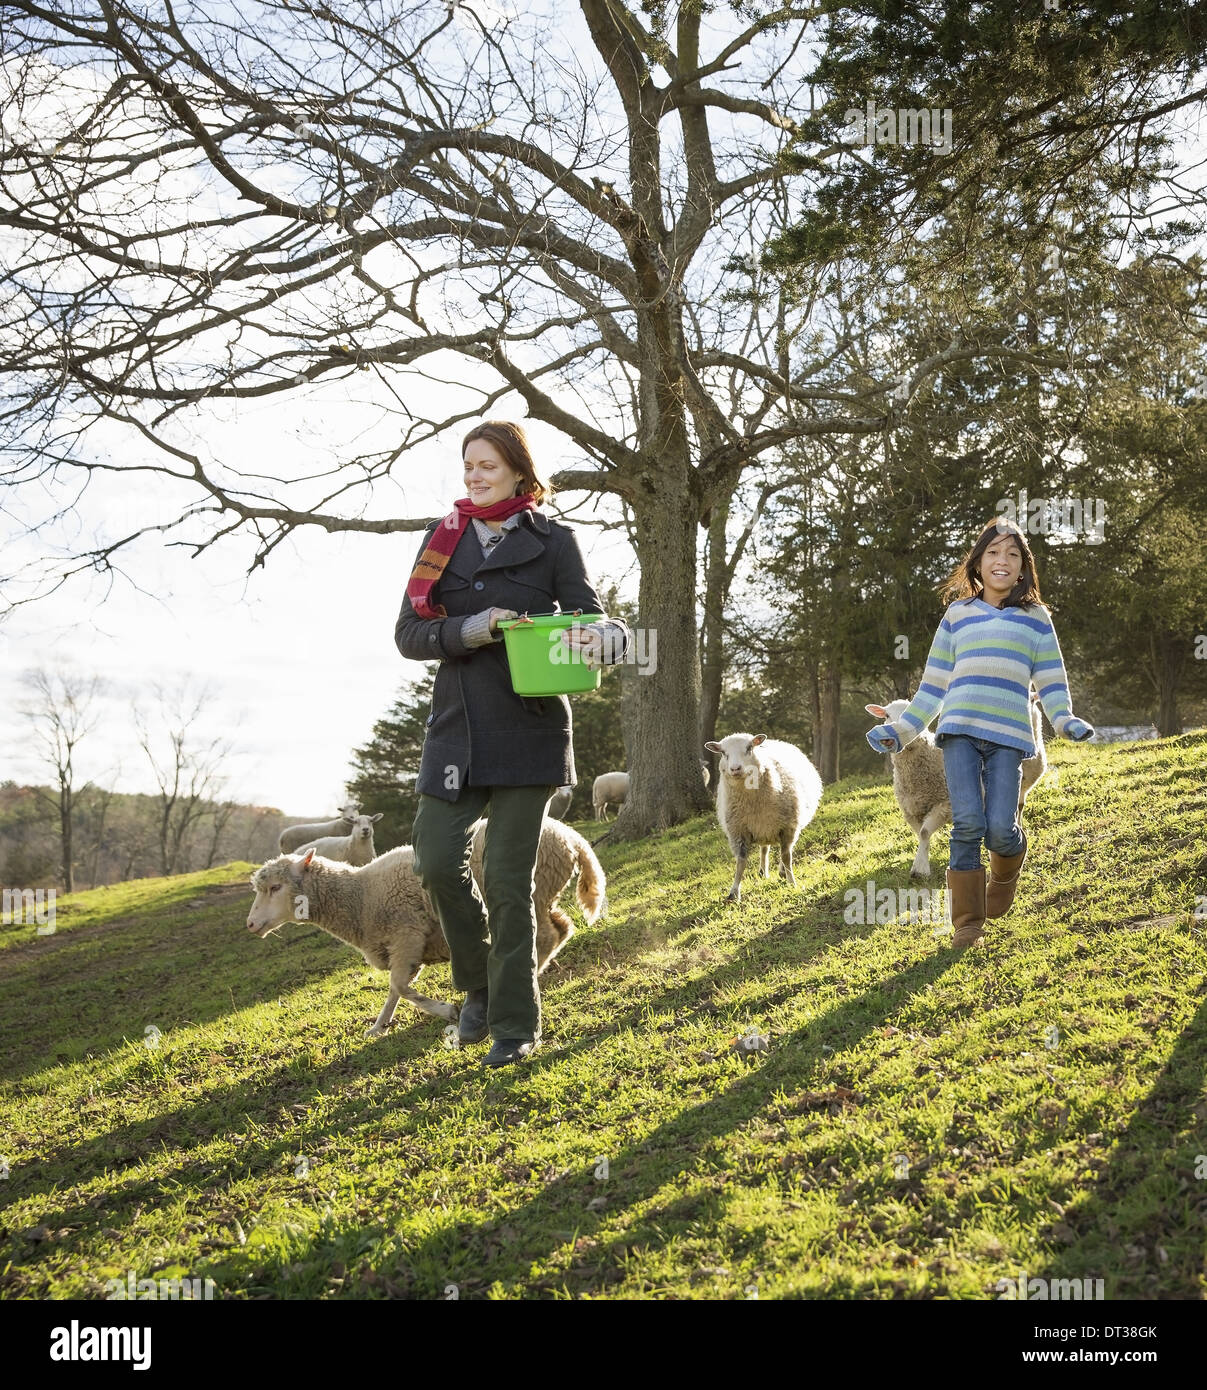 A woman with a bucket feeding the sheep at an animal sanctuary. Two children in the field. Stock Photo